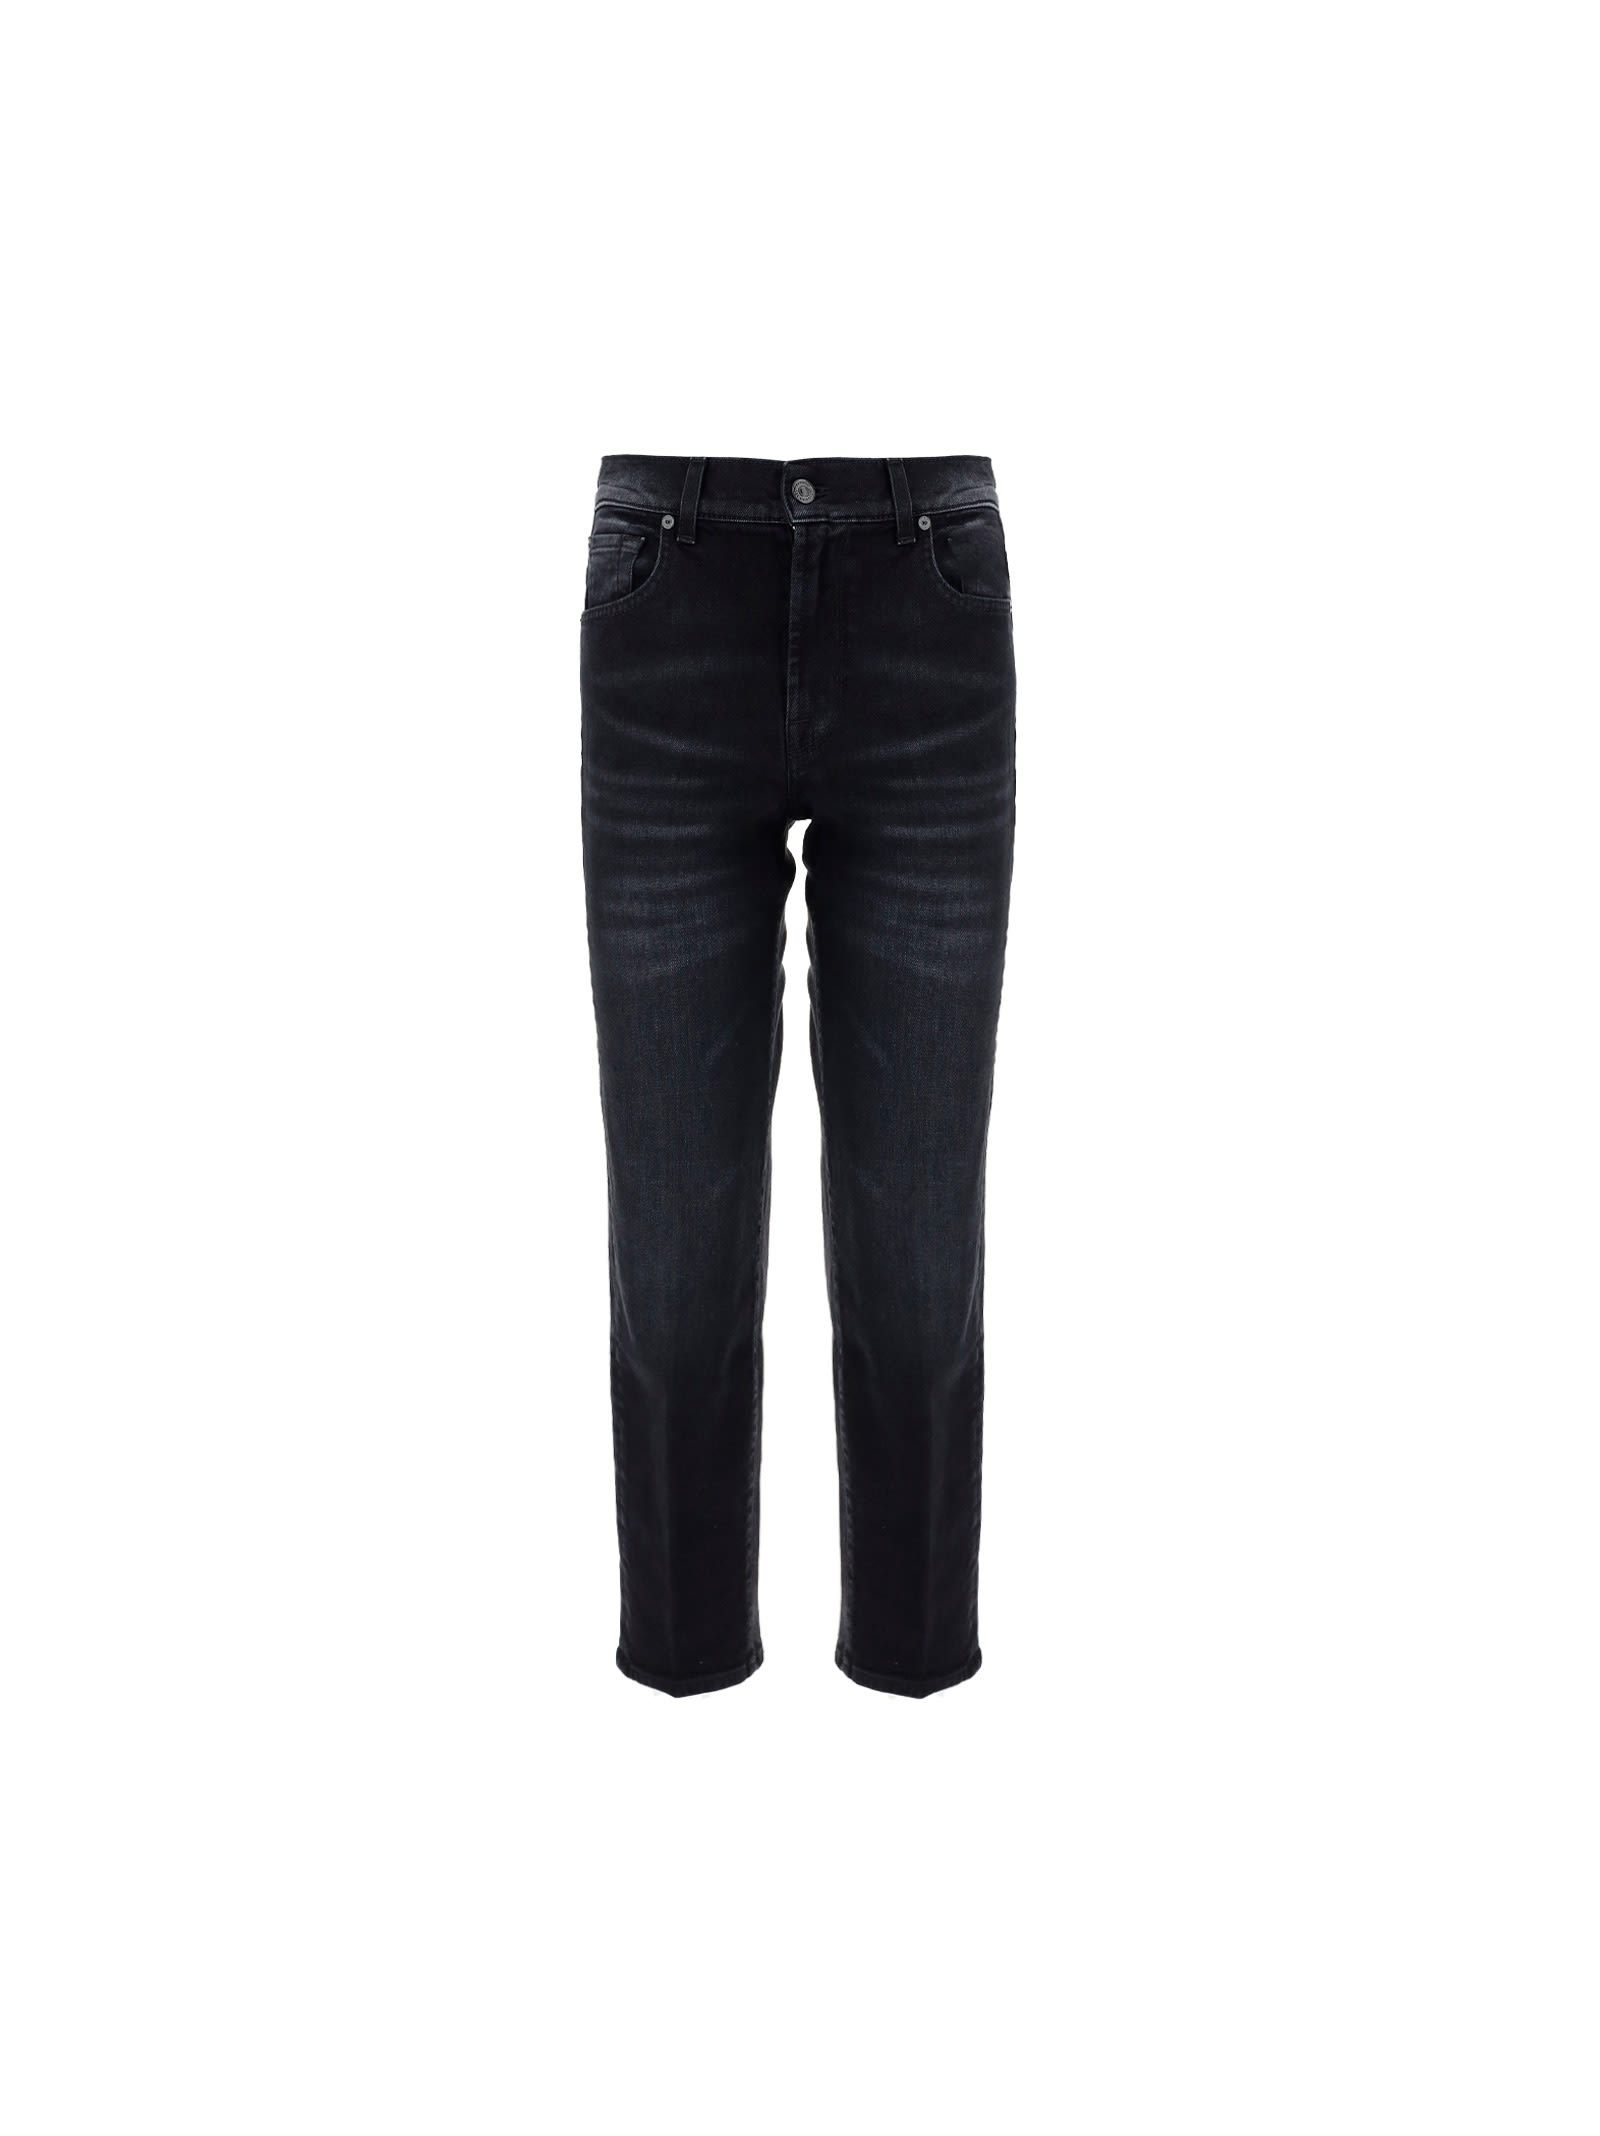 7 For All Mankind 7forallmankind The Modern Straight Jeans